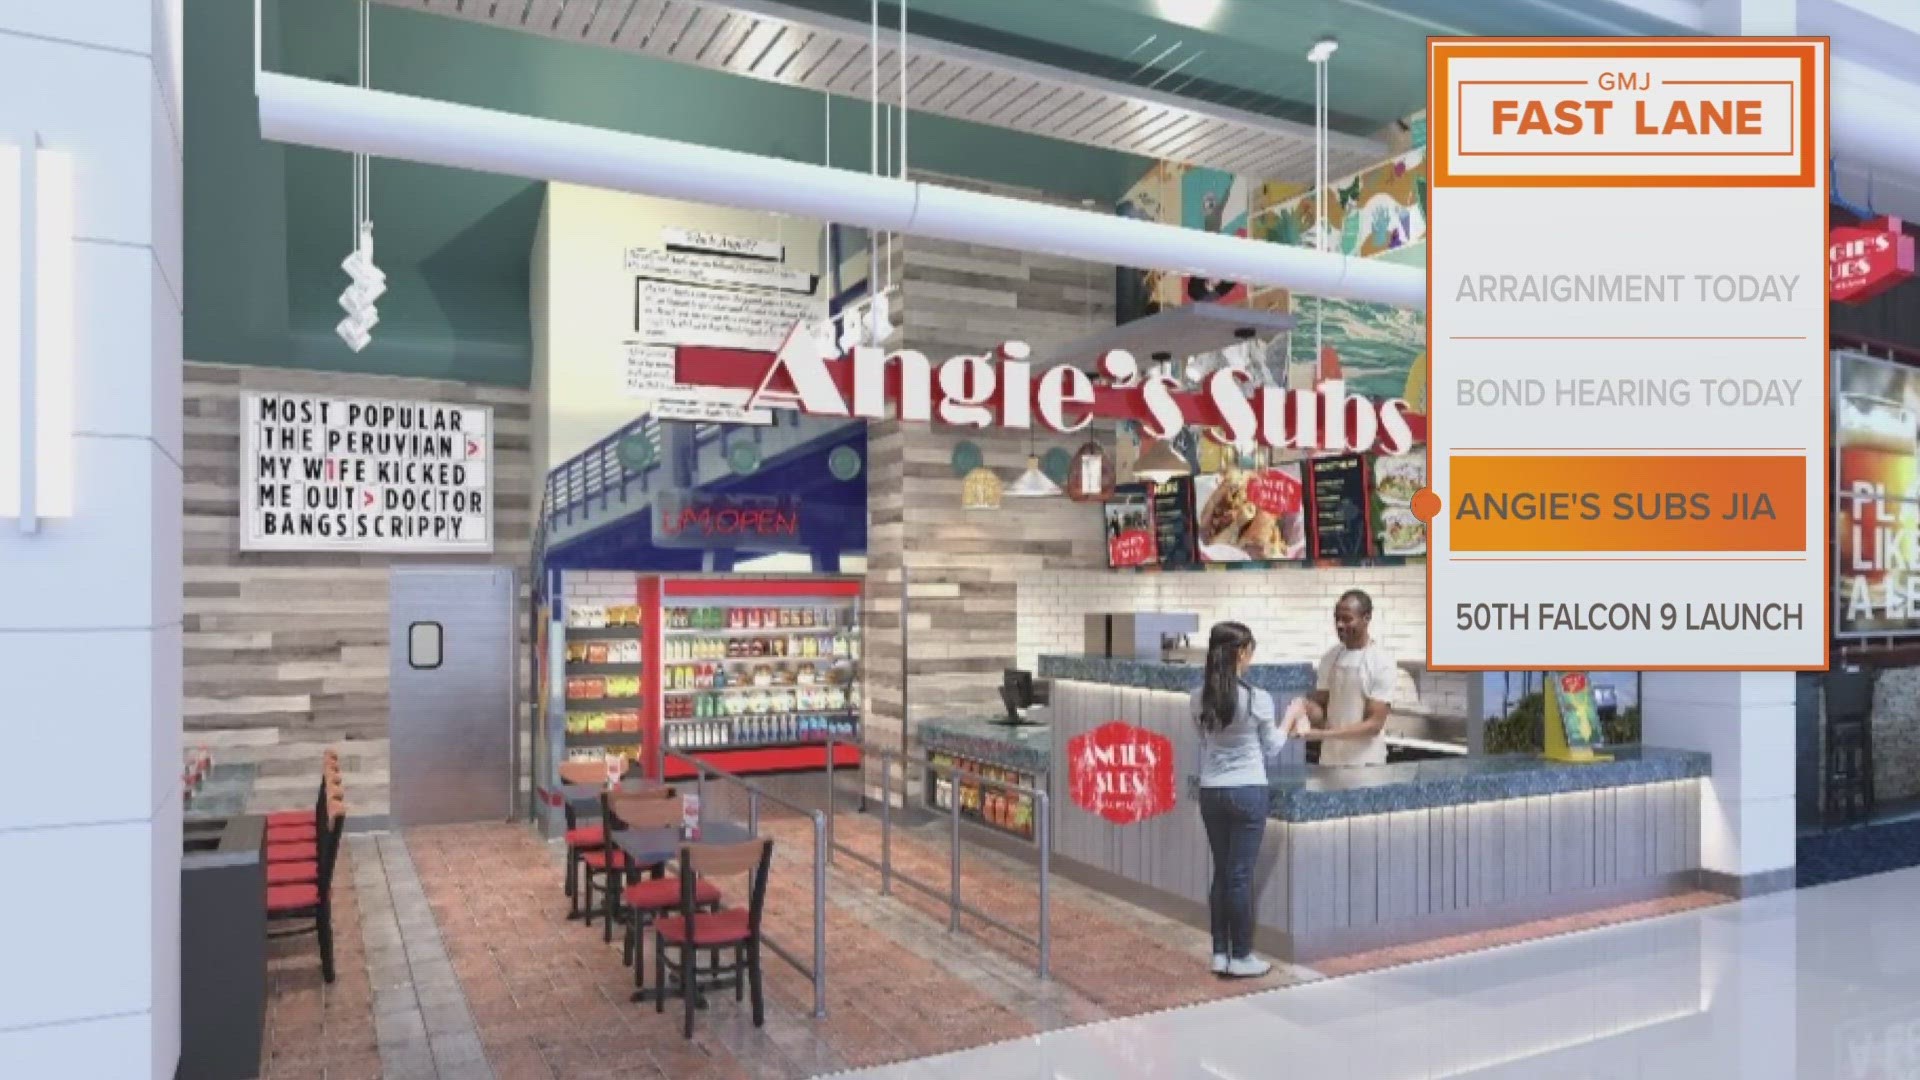 The new location is slated to open in early 2024 at concourse A in the airport.